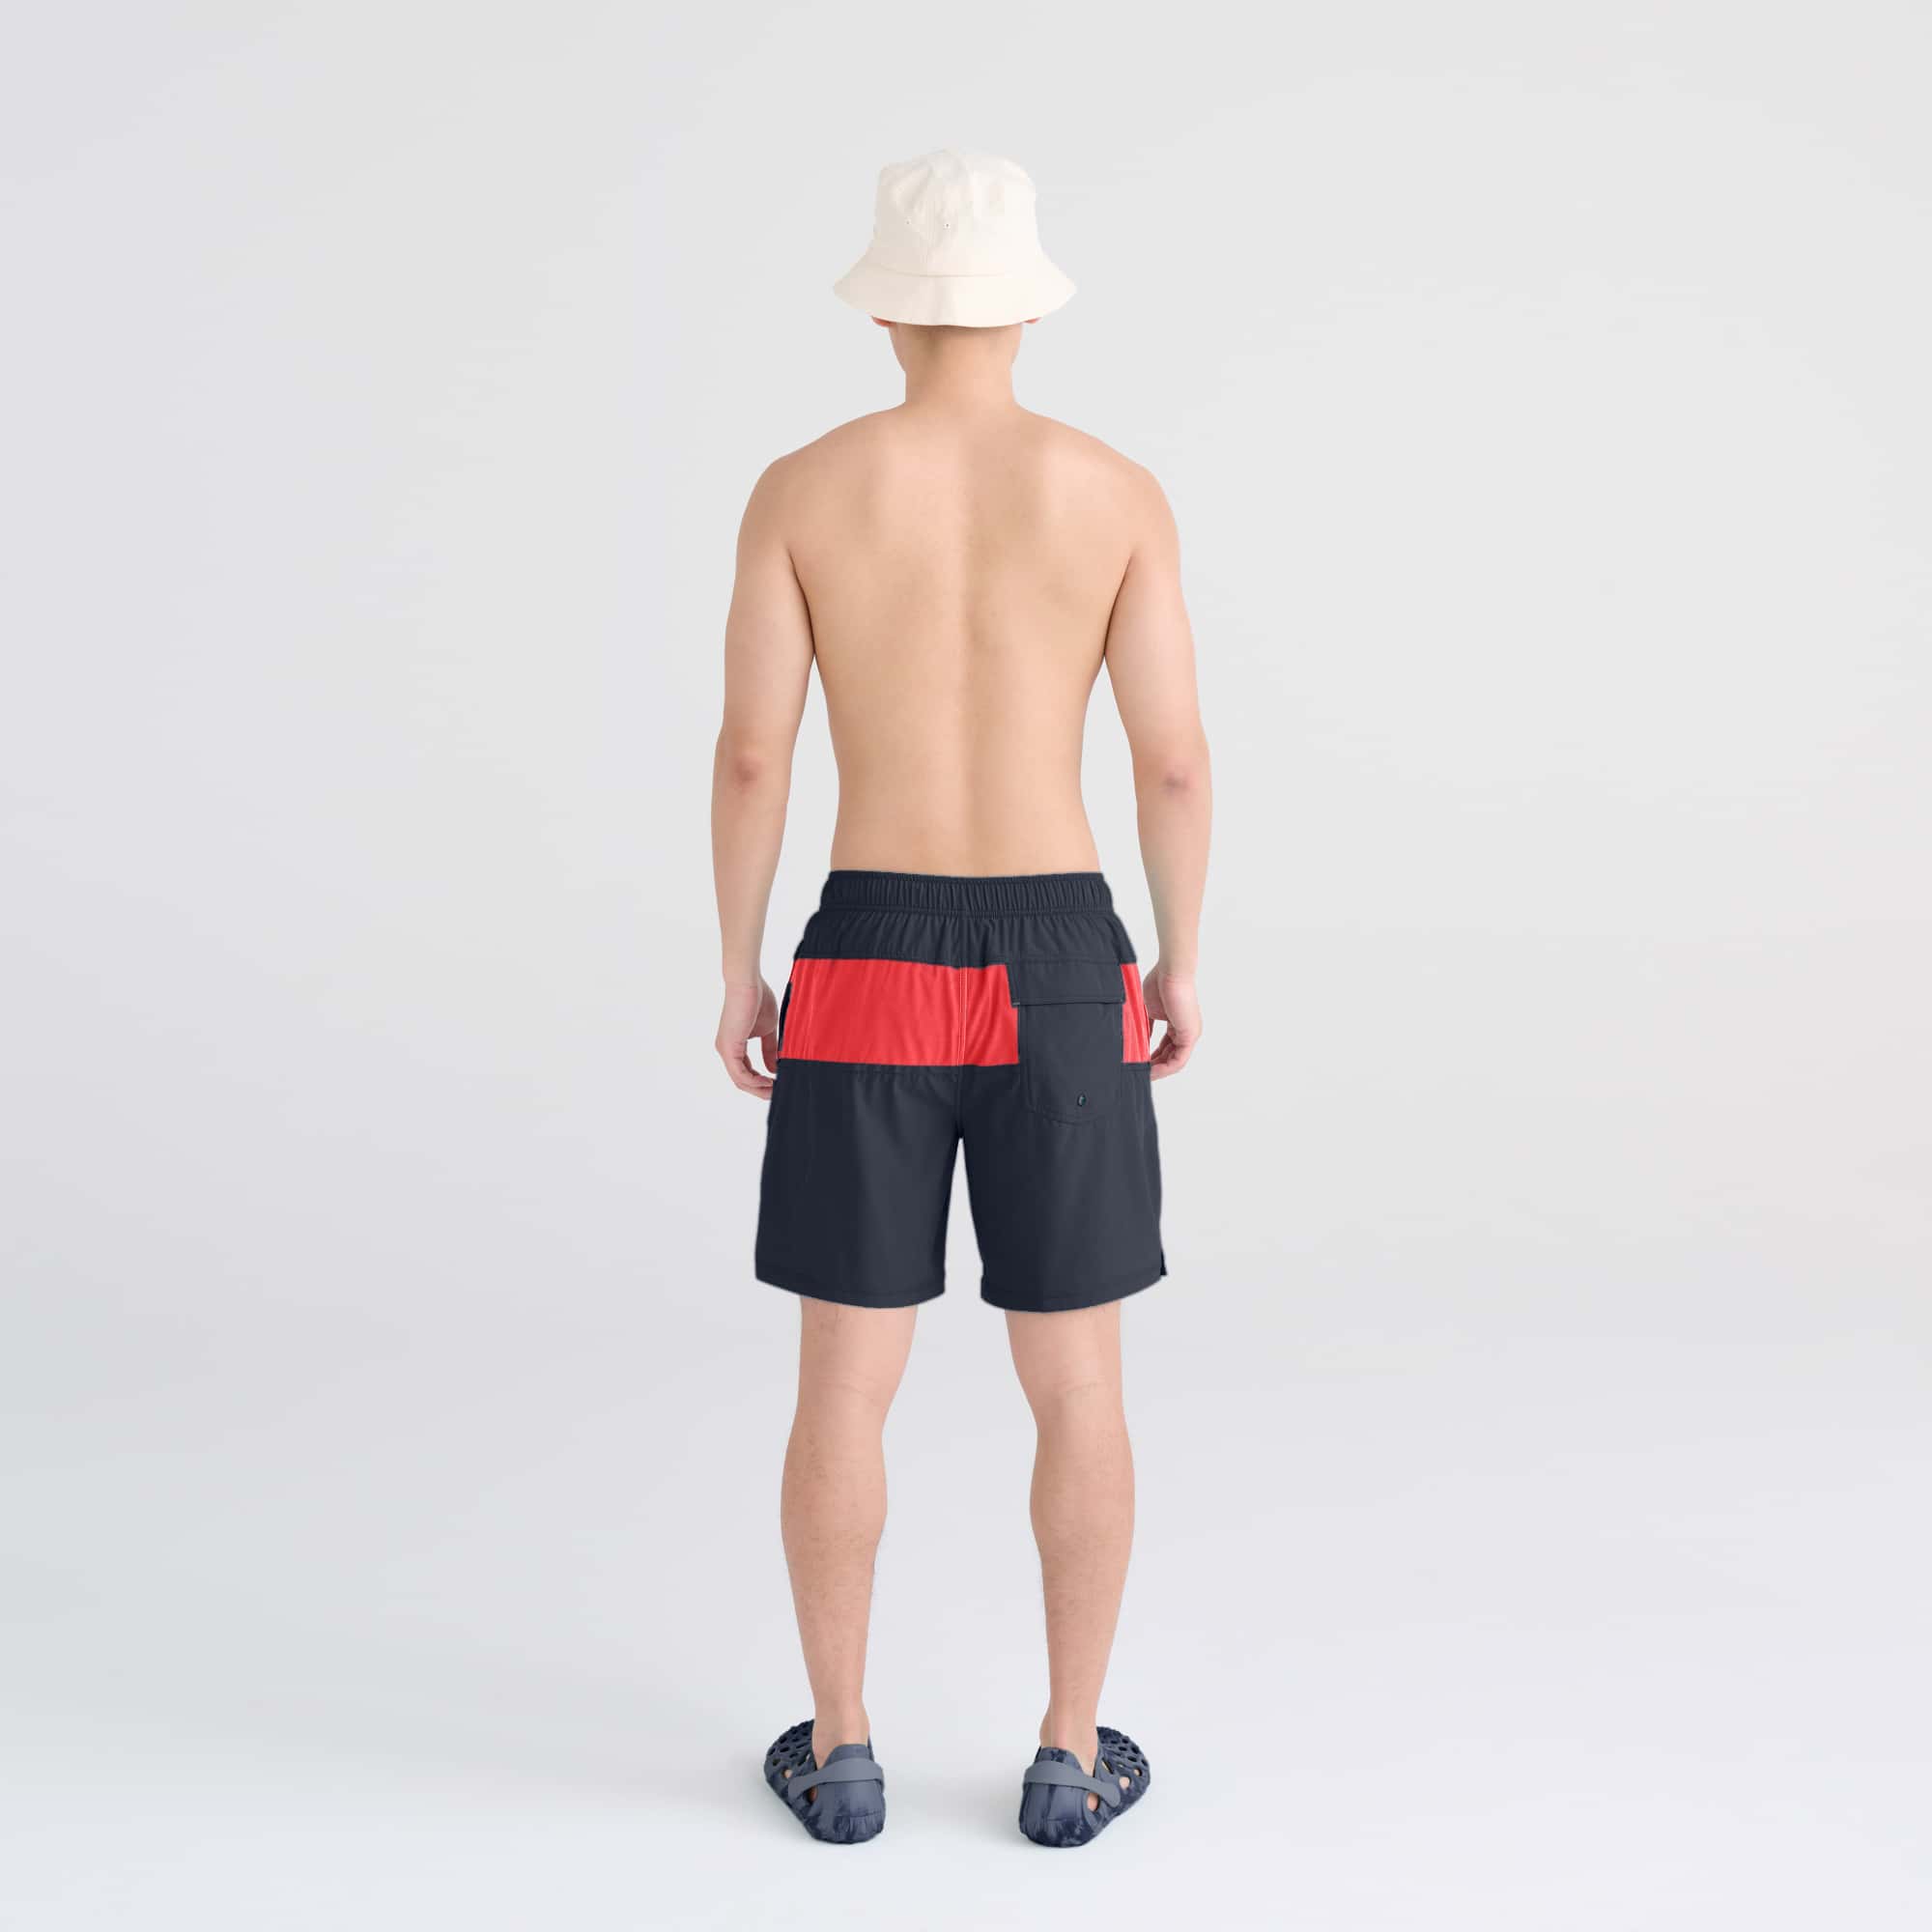 Back - Model wearing Oh Buoy 2N1 Swim Trunk 7" in India Ink/Hibiscus